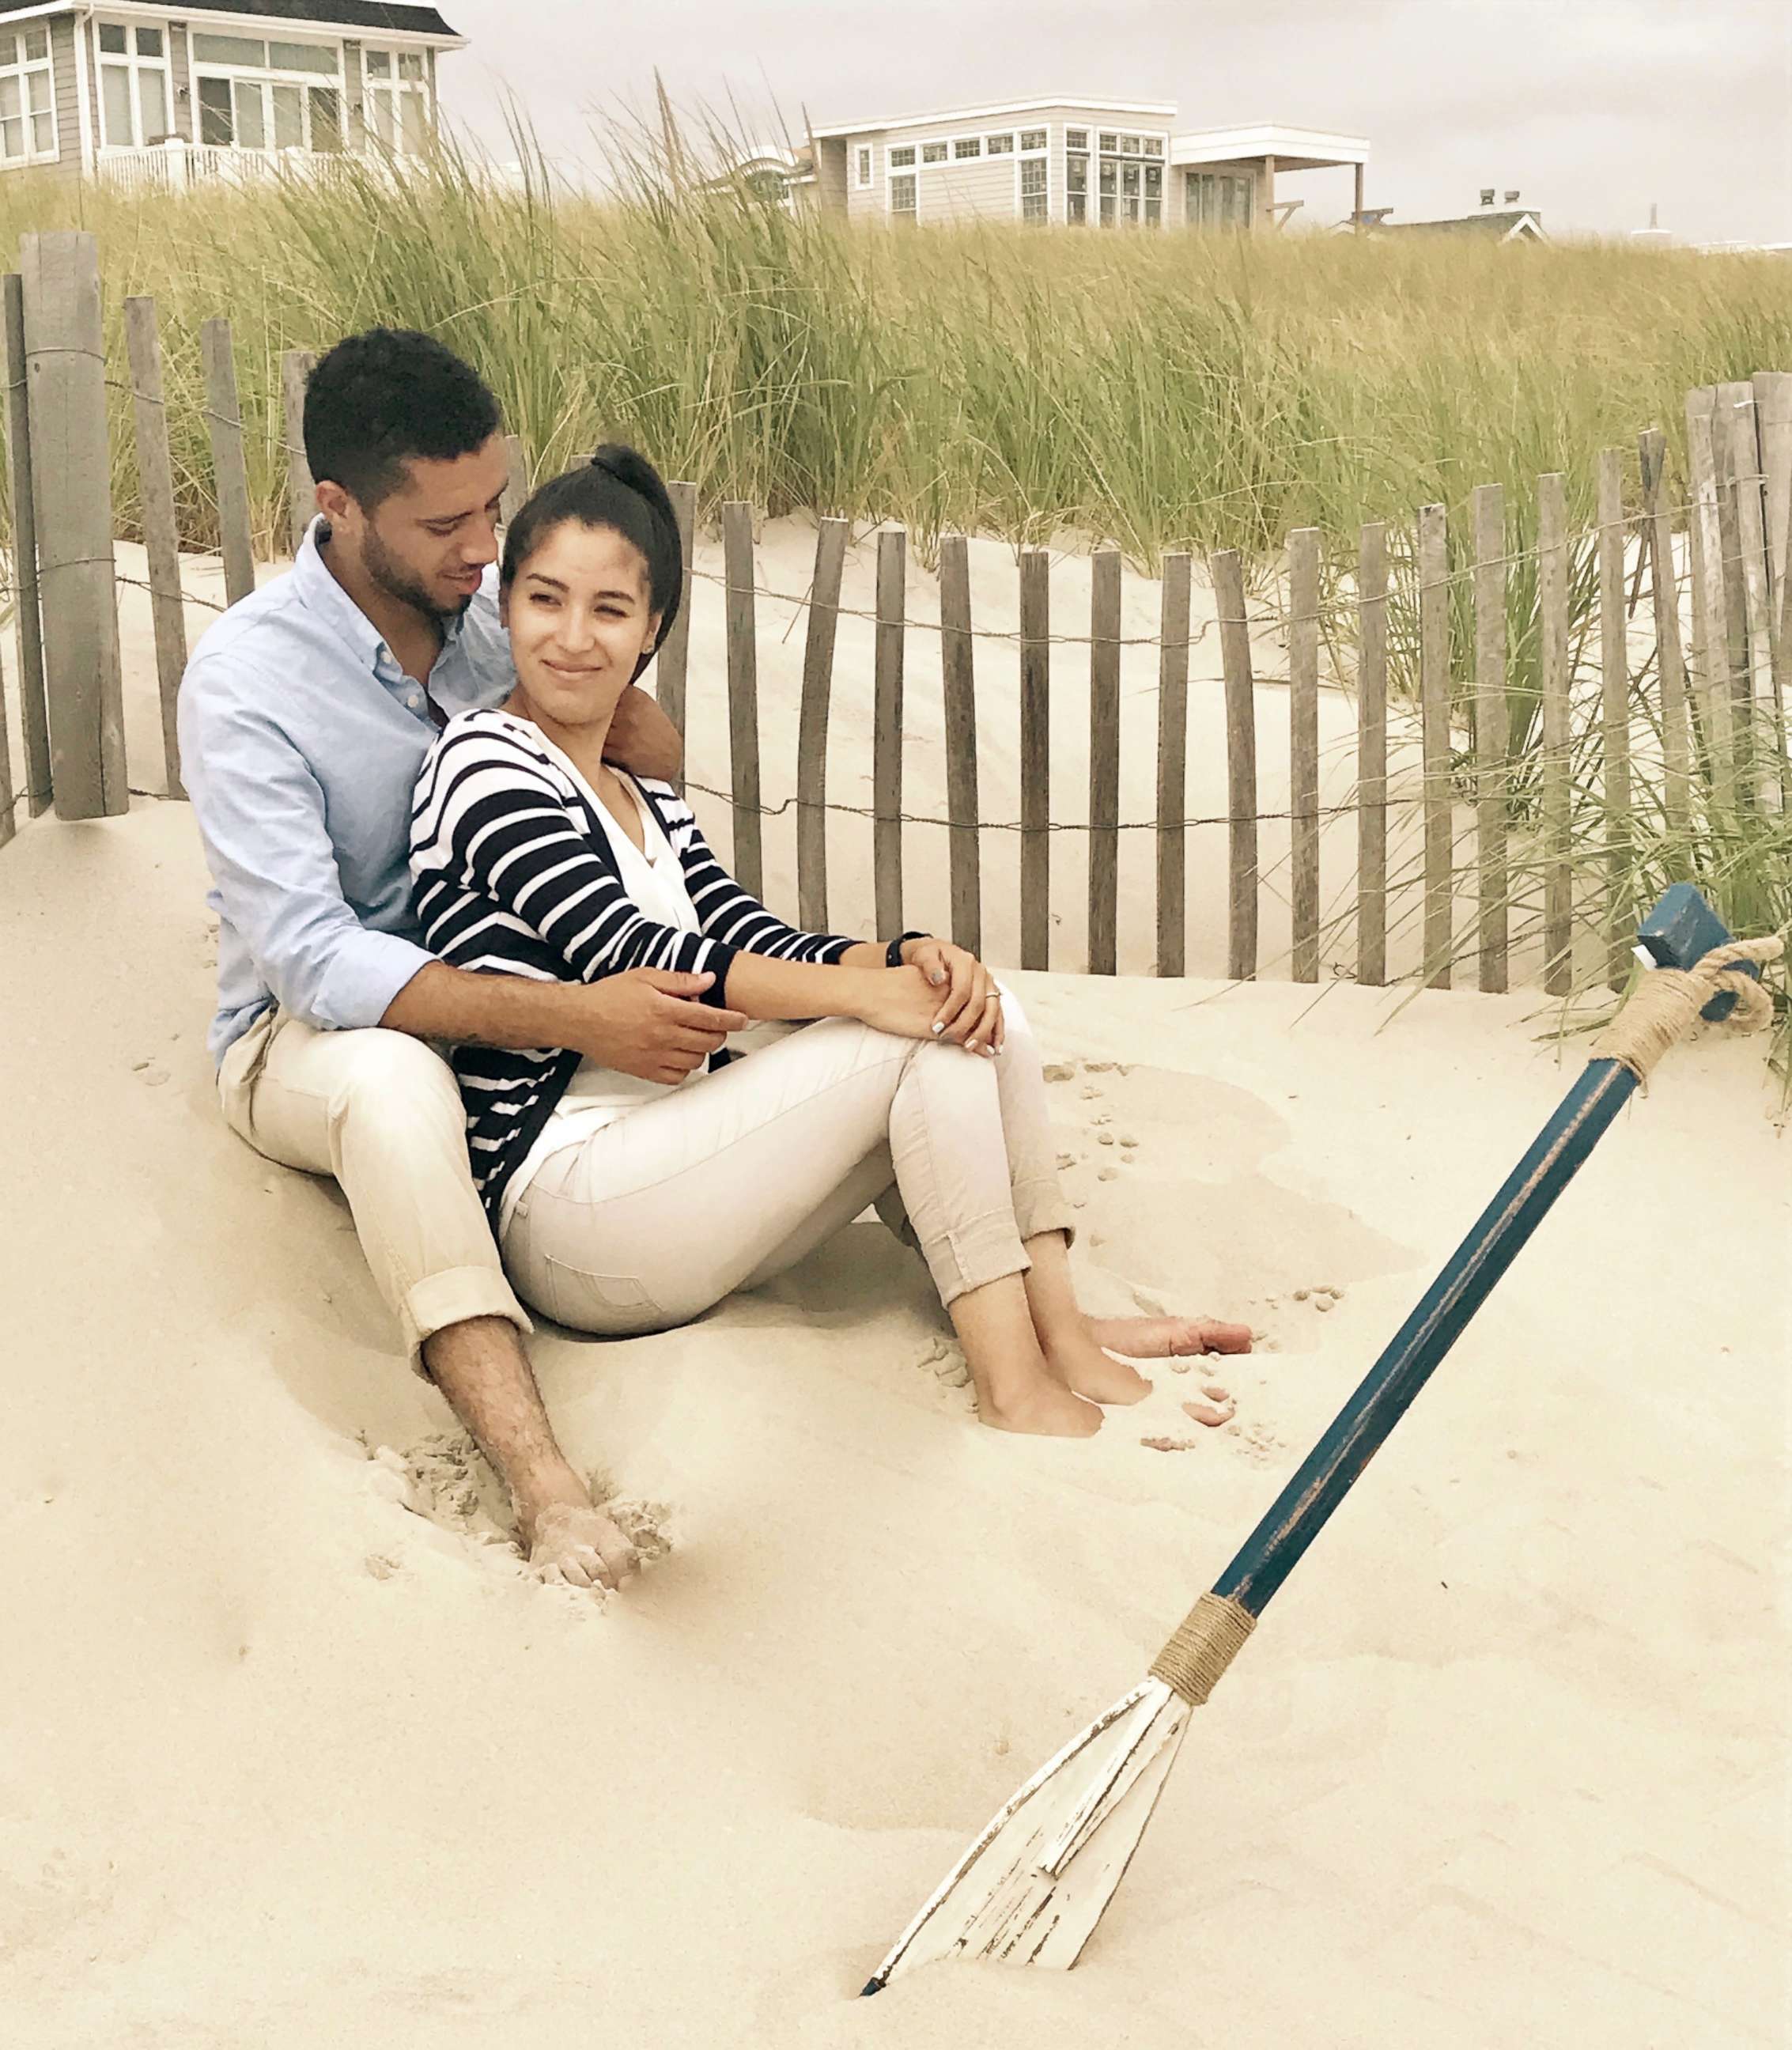 PHOTO: David Ruiz and Samantha Mills of New Jersey, seen in an undated handout photo, are getting married on April 22, 2018, which is Earth Day.